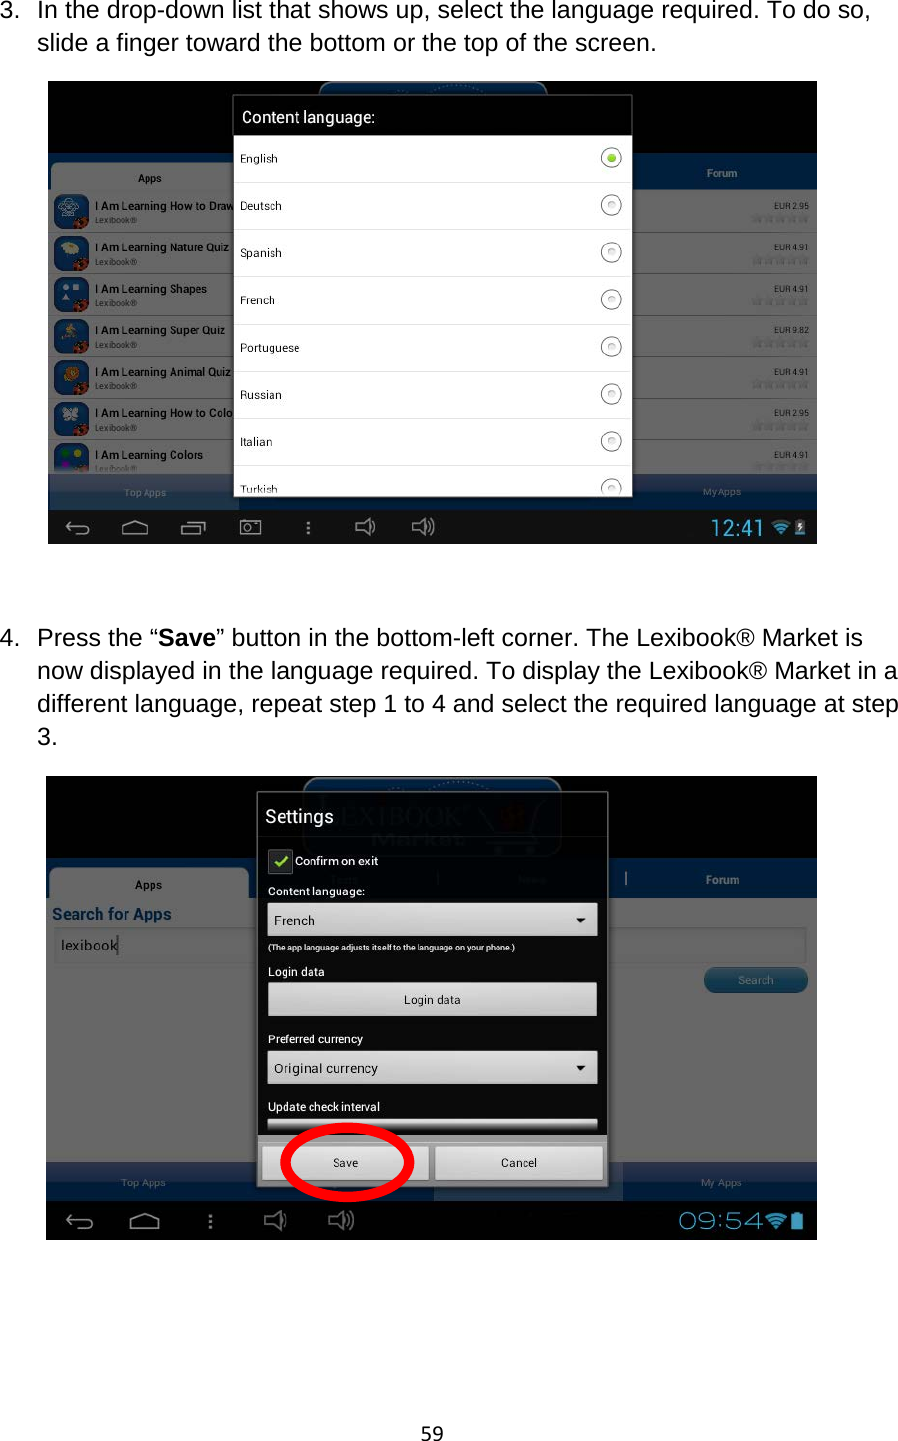 59  3. In the drop-down list that shows up, select the language required. To do so, slide a finger toward the bottom or the top of the screen.   4. Press the “Save” button in the bottom-left corner. The Lexibook® Market is now displayed in the language required. To display the Lexibook® Market in a different language, repeat step 1 to 4 and select the required language at step 3.     